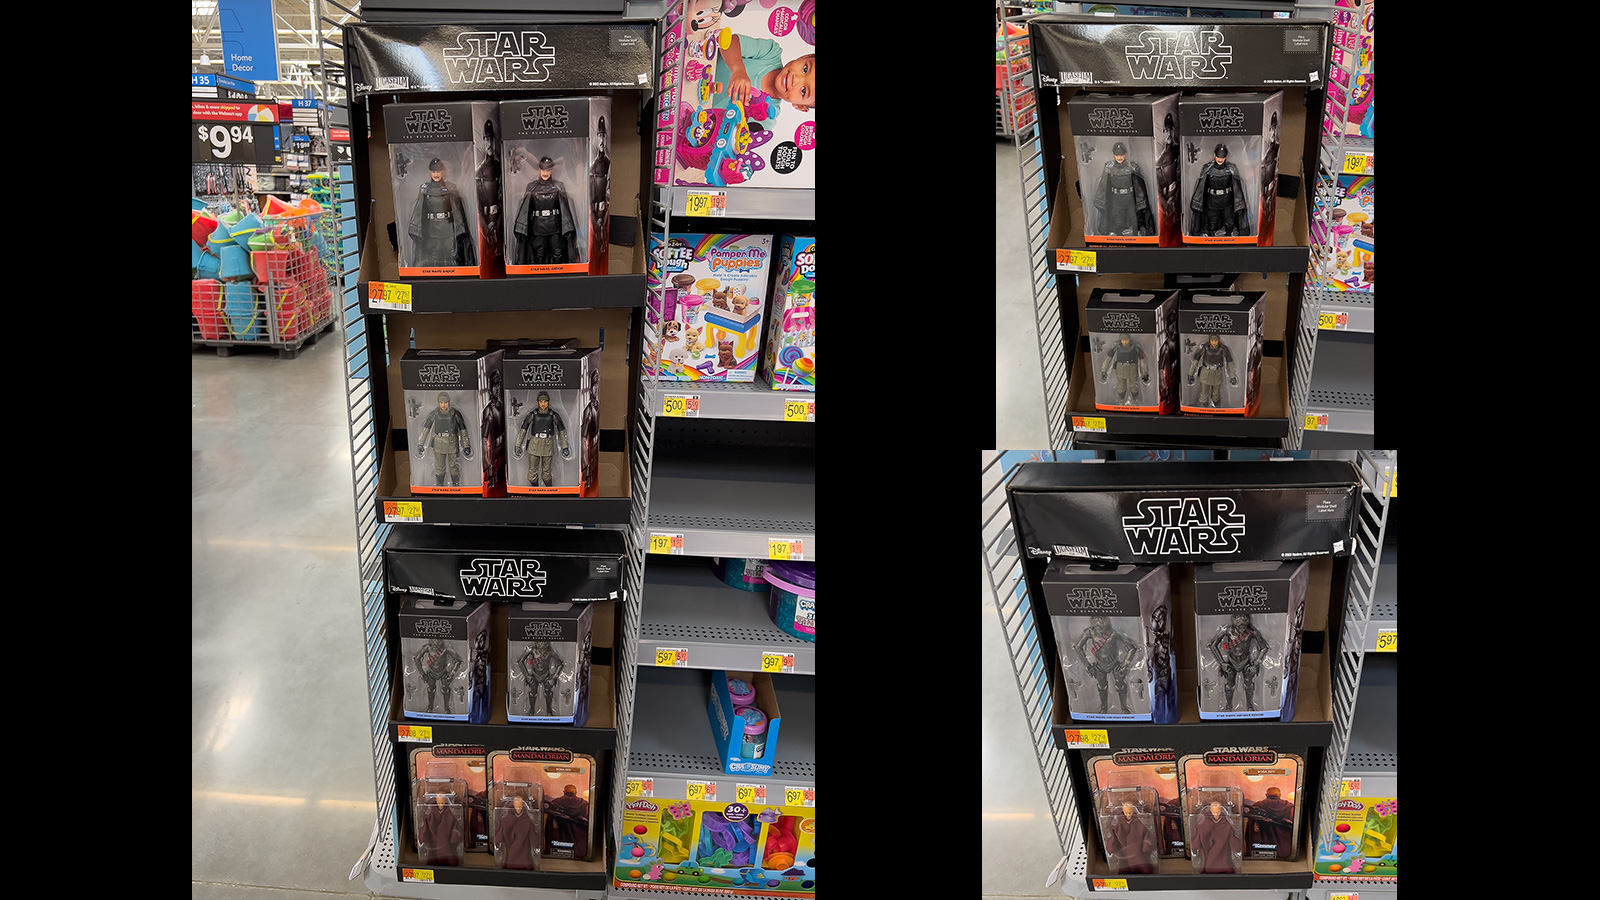 Found - Walmart Exclusive The Black Series End Cap Display - A Little Too Late?